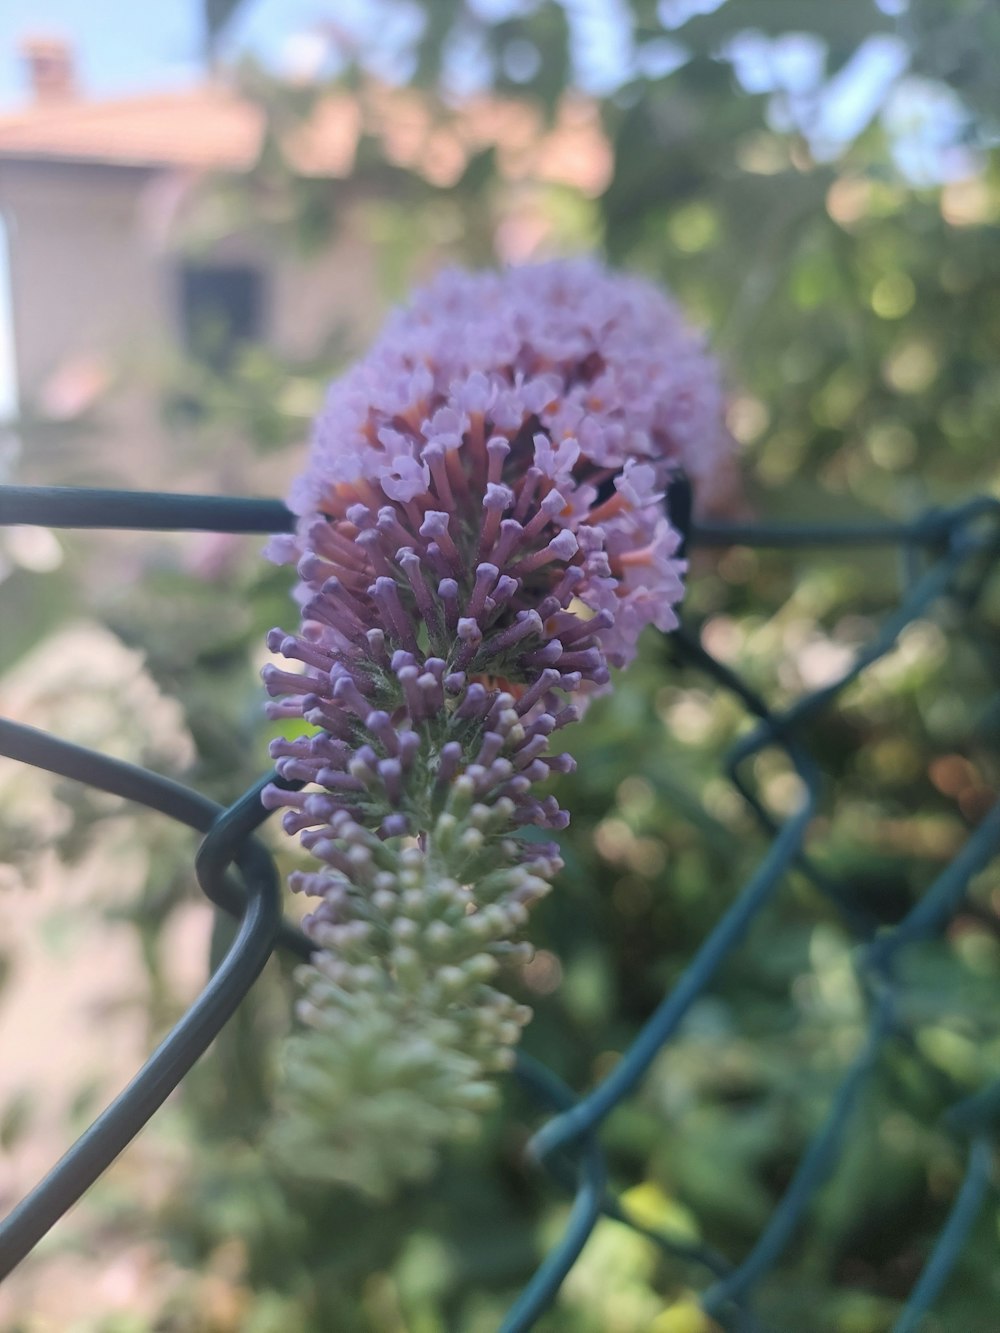 a close up of a purple flower on a fence